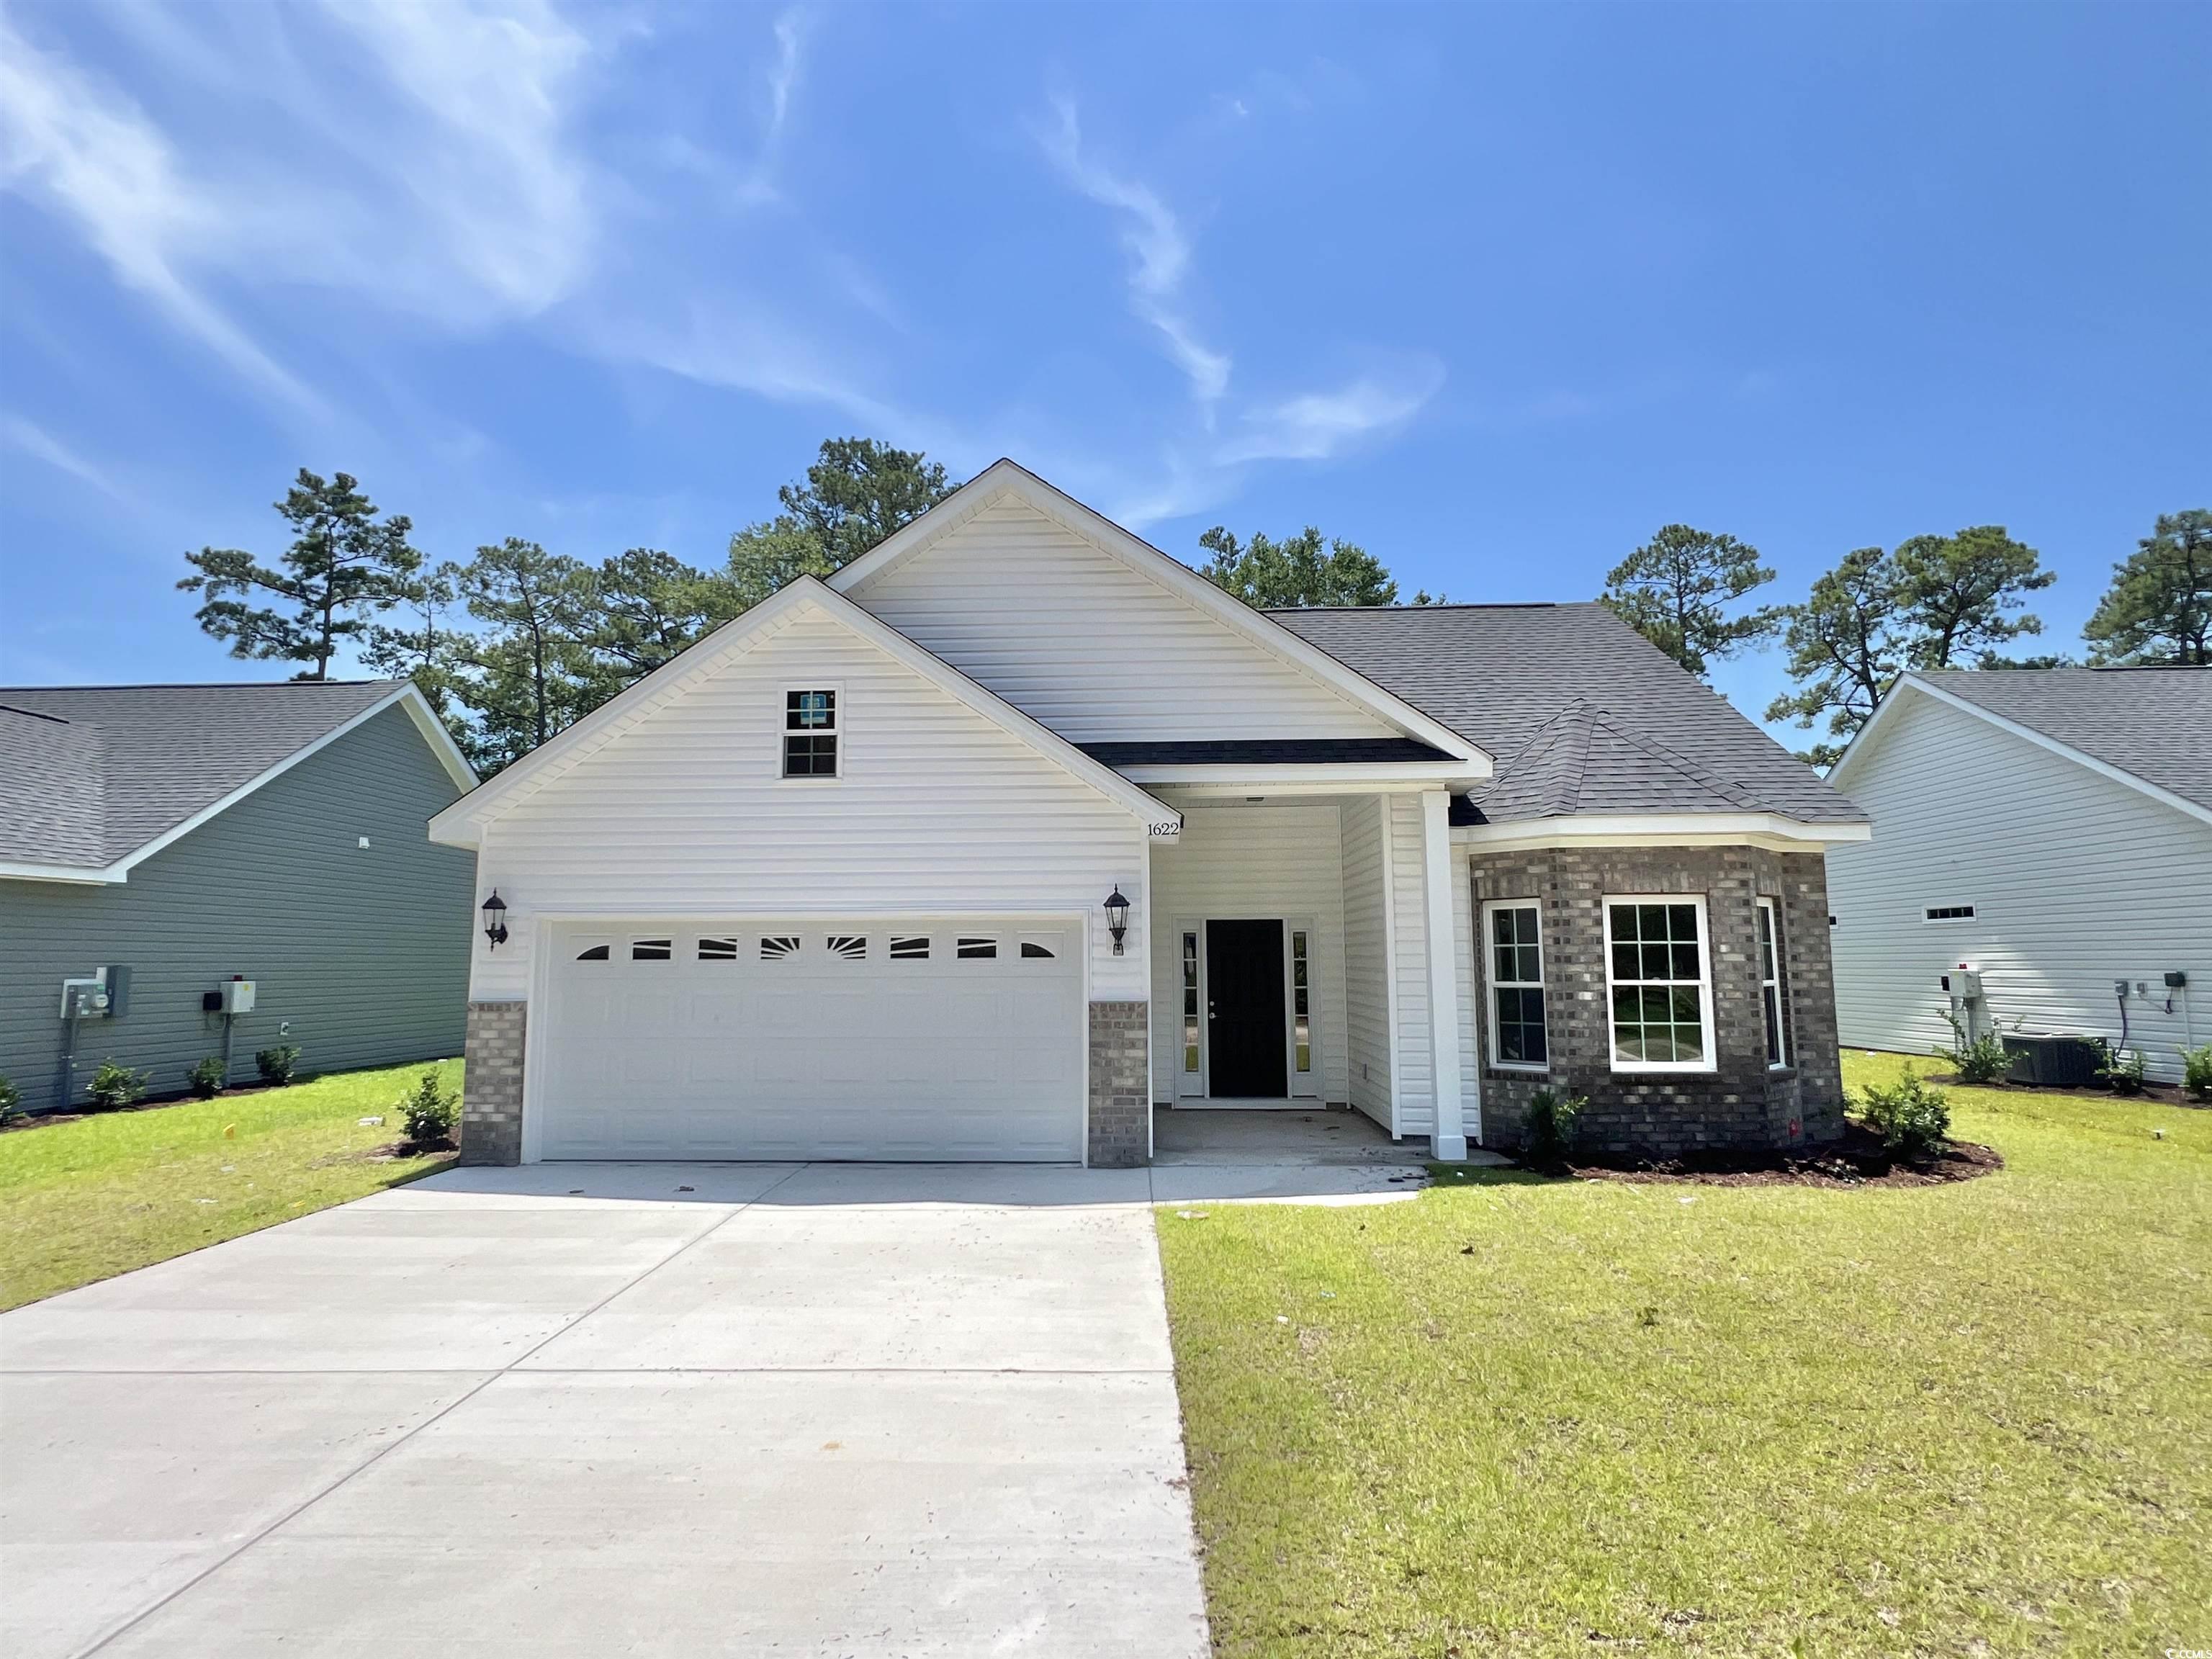 1622 San Andres Ave. Little River, SC 29566